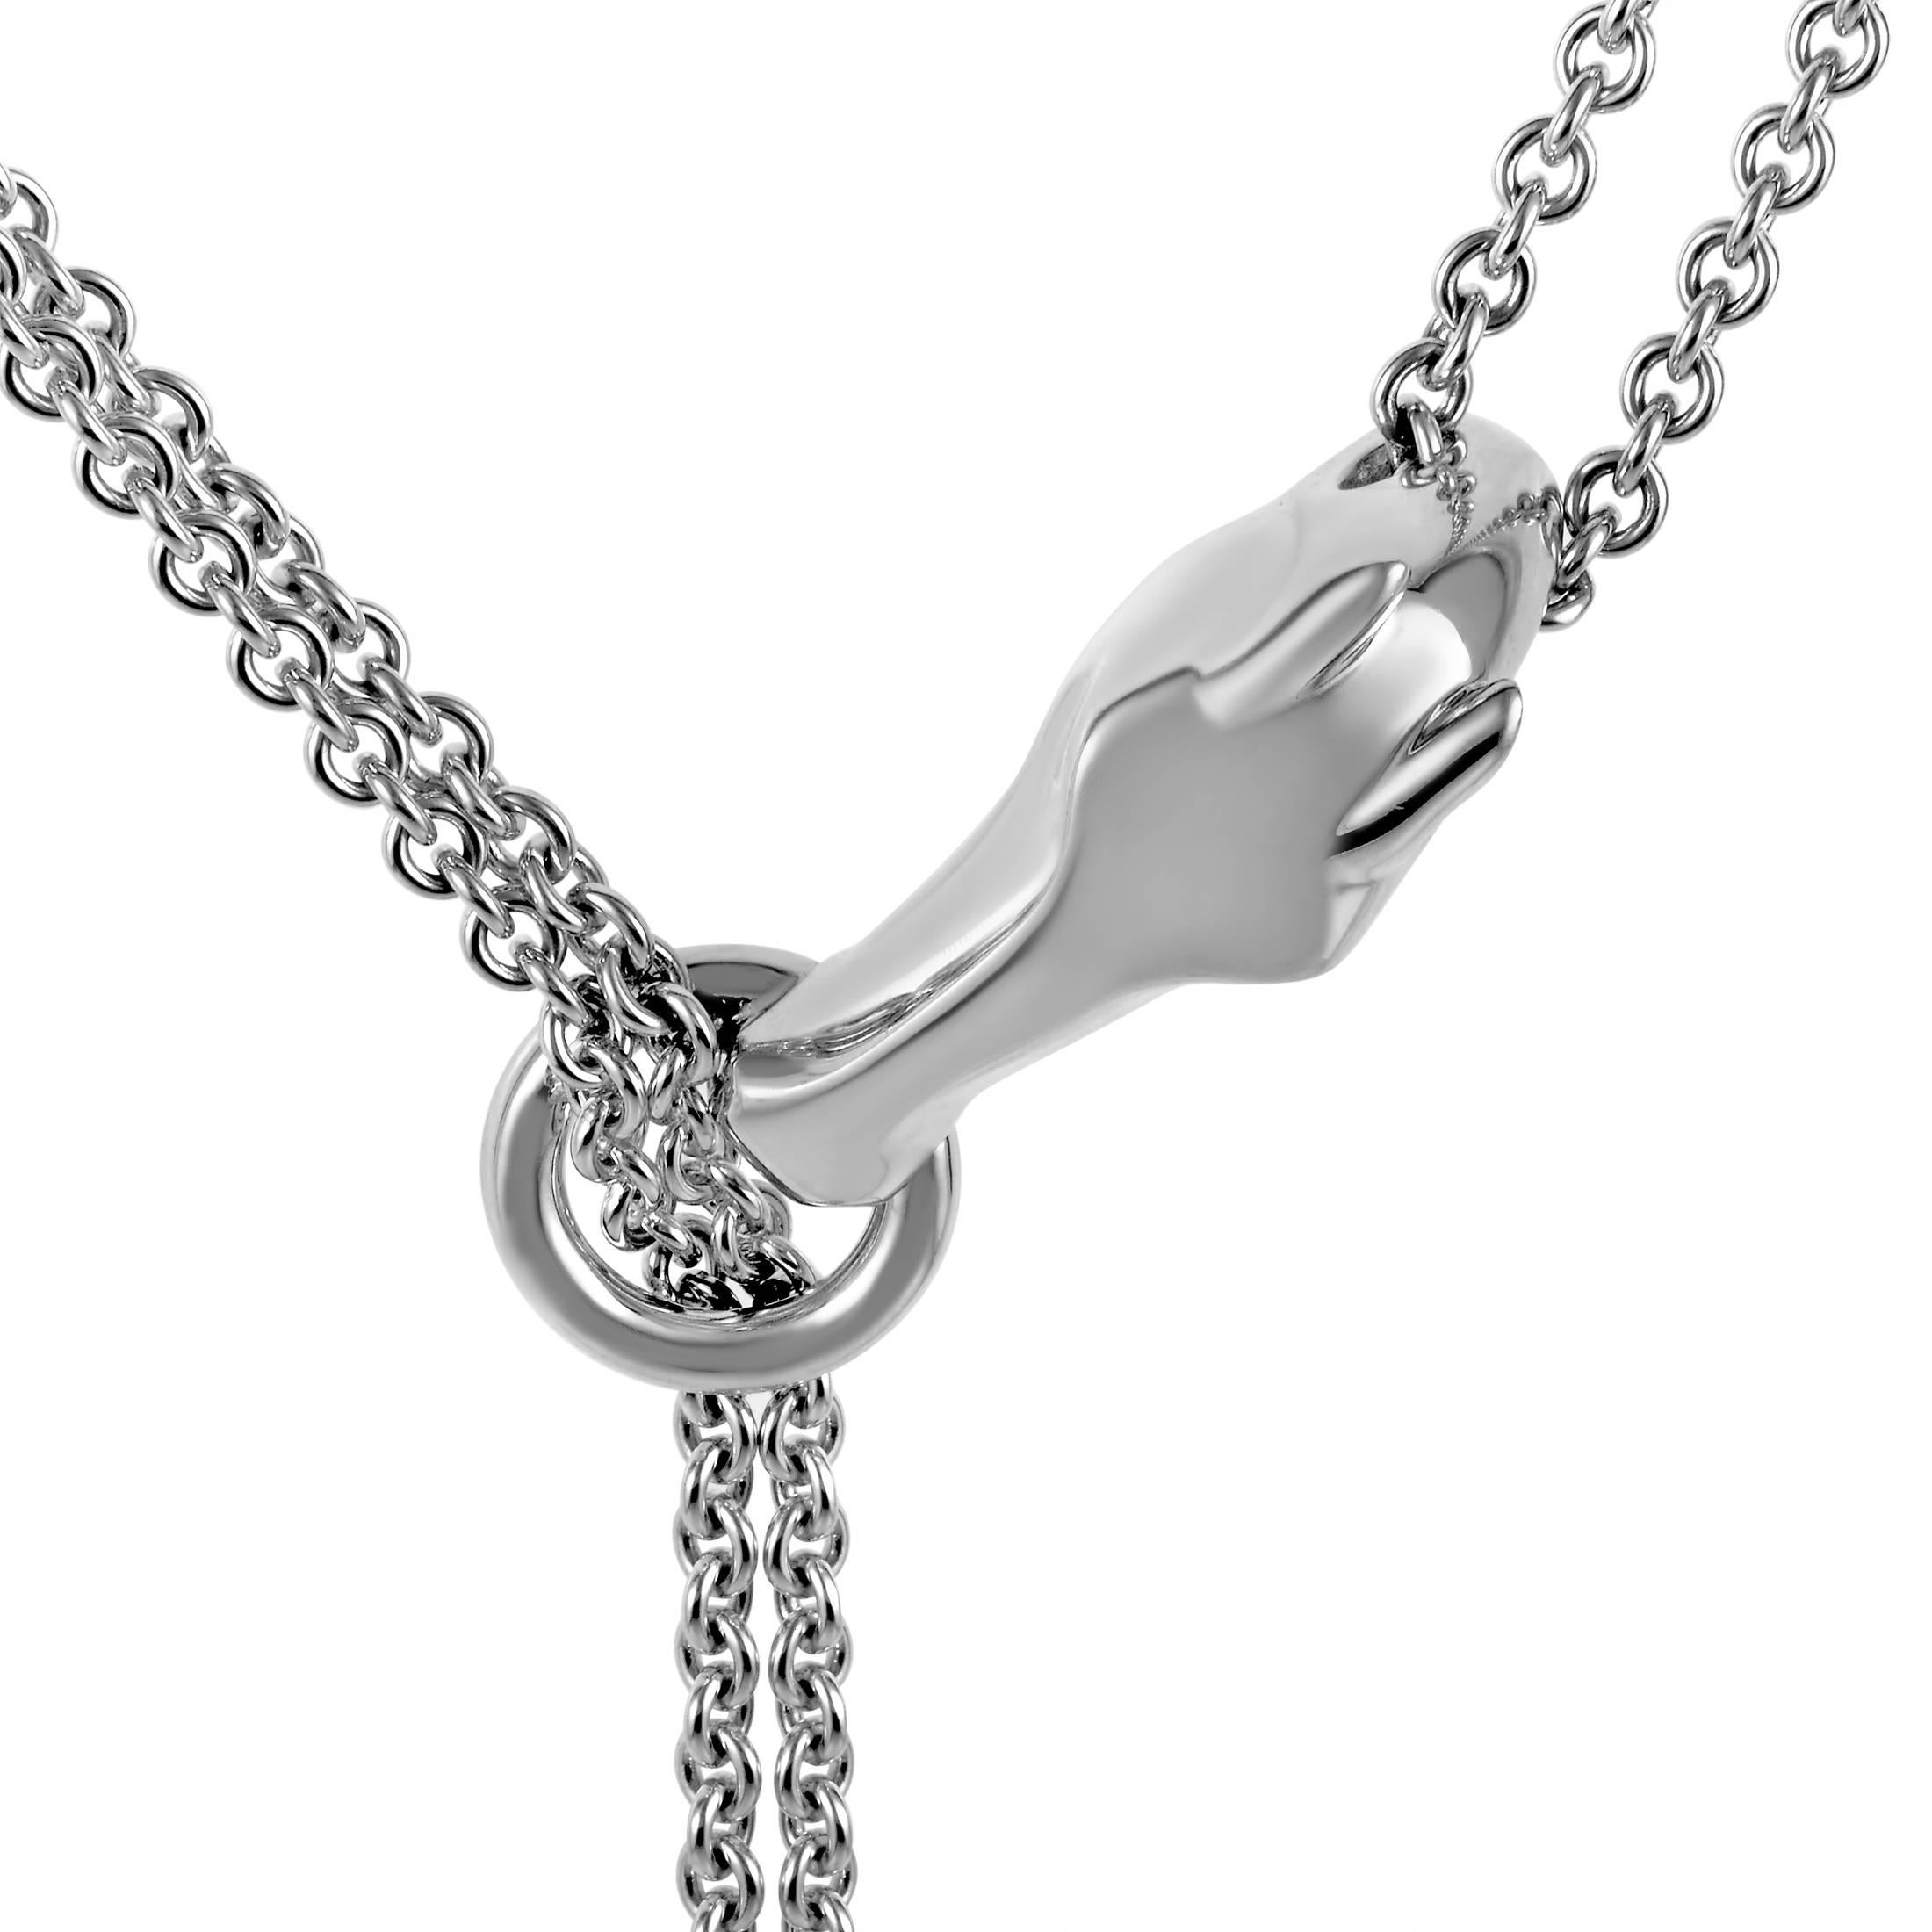 Elegant subtlety and masterful expertise meet in this fascinating necklace from Hermès made of spotlessly gleaming silver with the majestic motif of a horse's head at the heart of the design.
Pendant Dimensions: 8.00 x 0.88